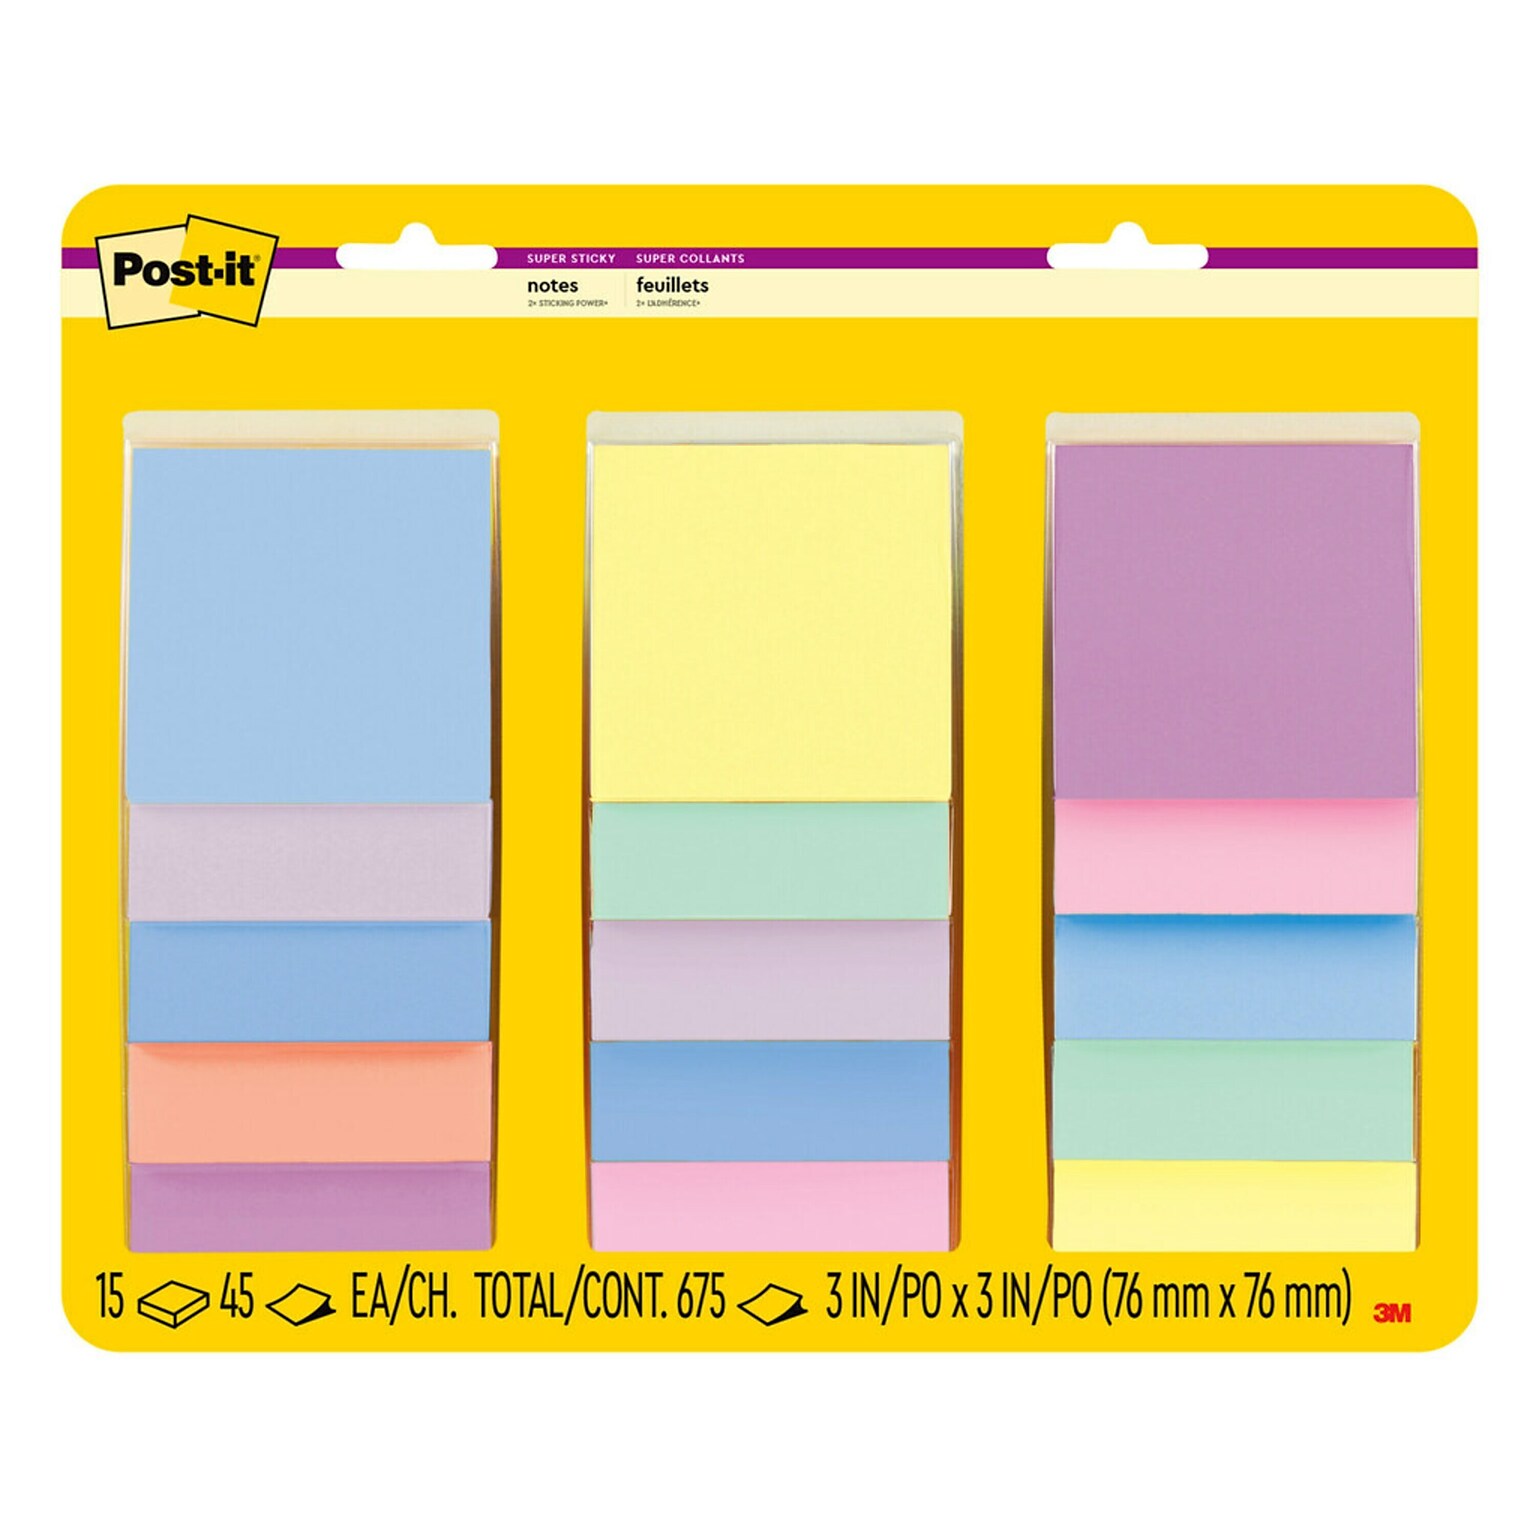 Post-it Super Sticky Notes, 3 x 3, Assorted Colors, 45 Sheets/Pad, 15 Pads/Pack (65415SSPS2)